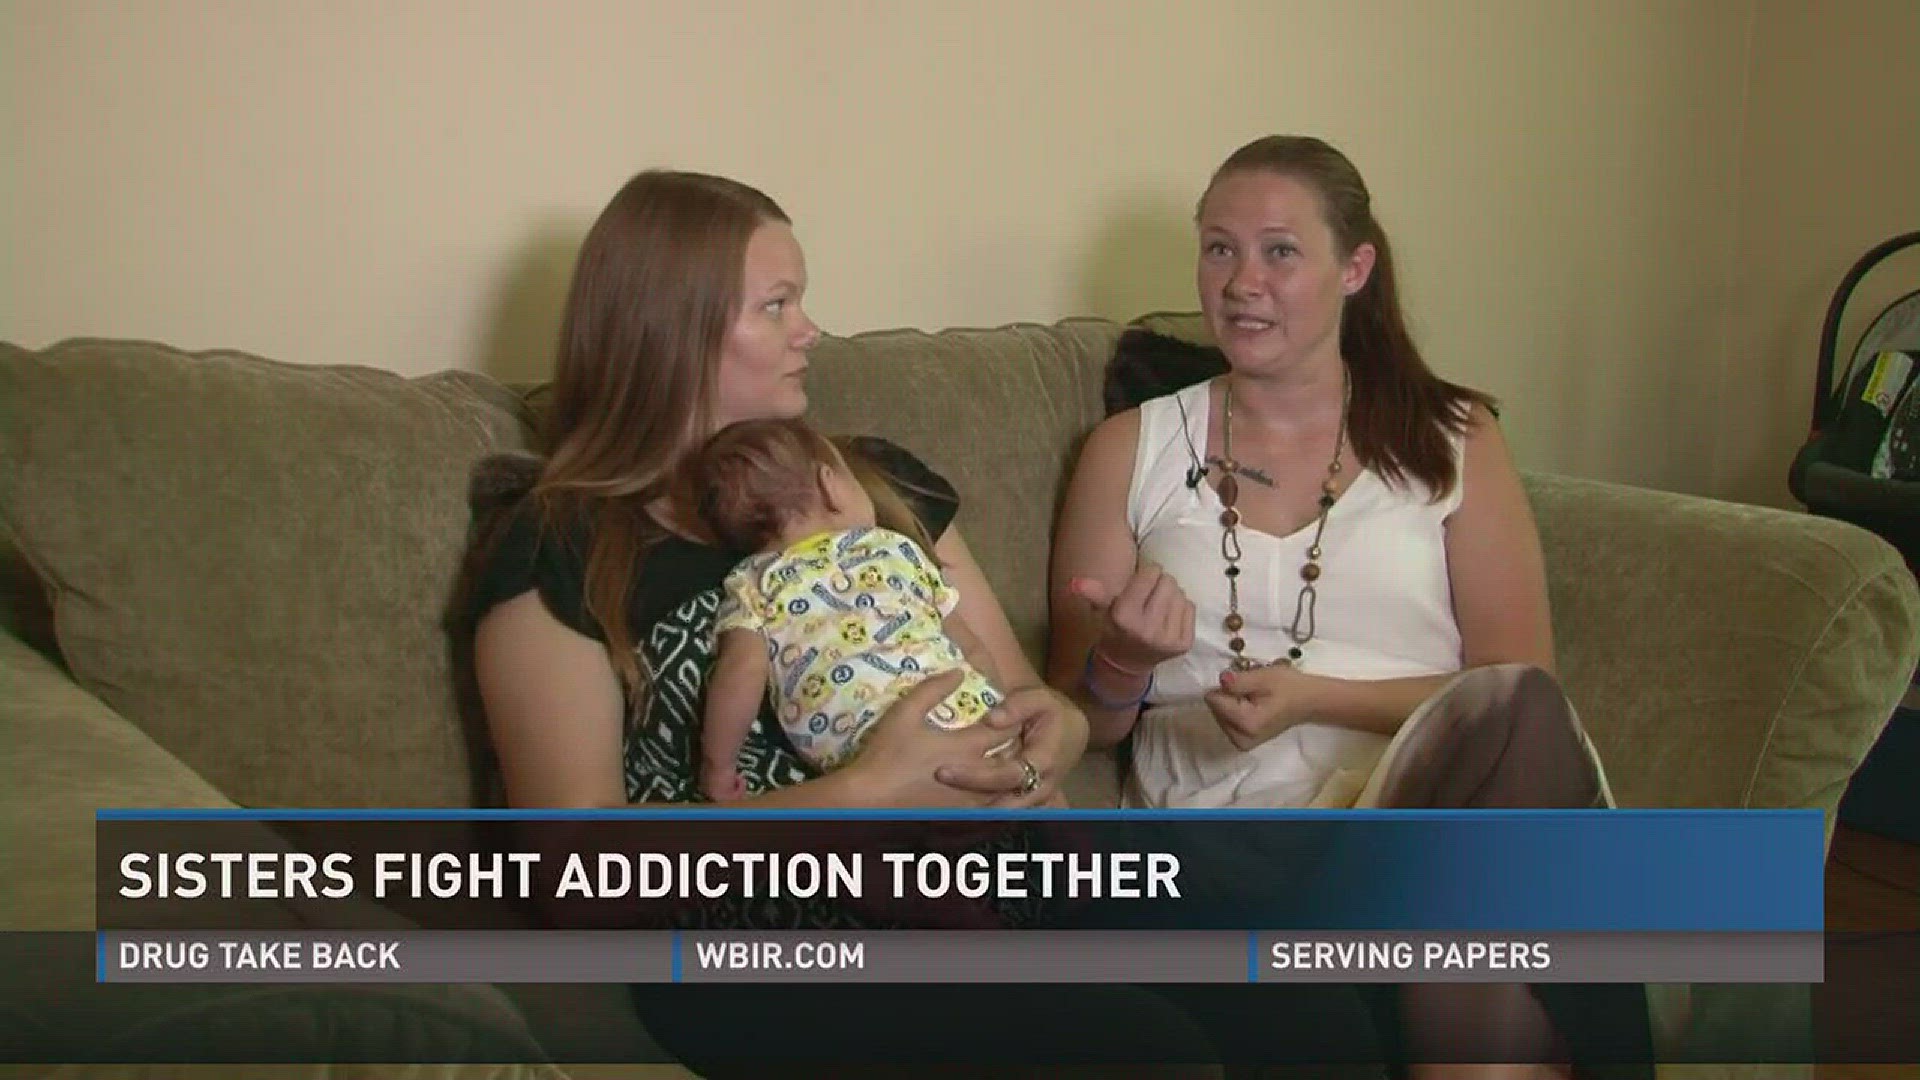 July 27, 2017: Two sisters who used drugs together are now clean and in recovery.